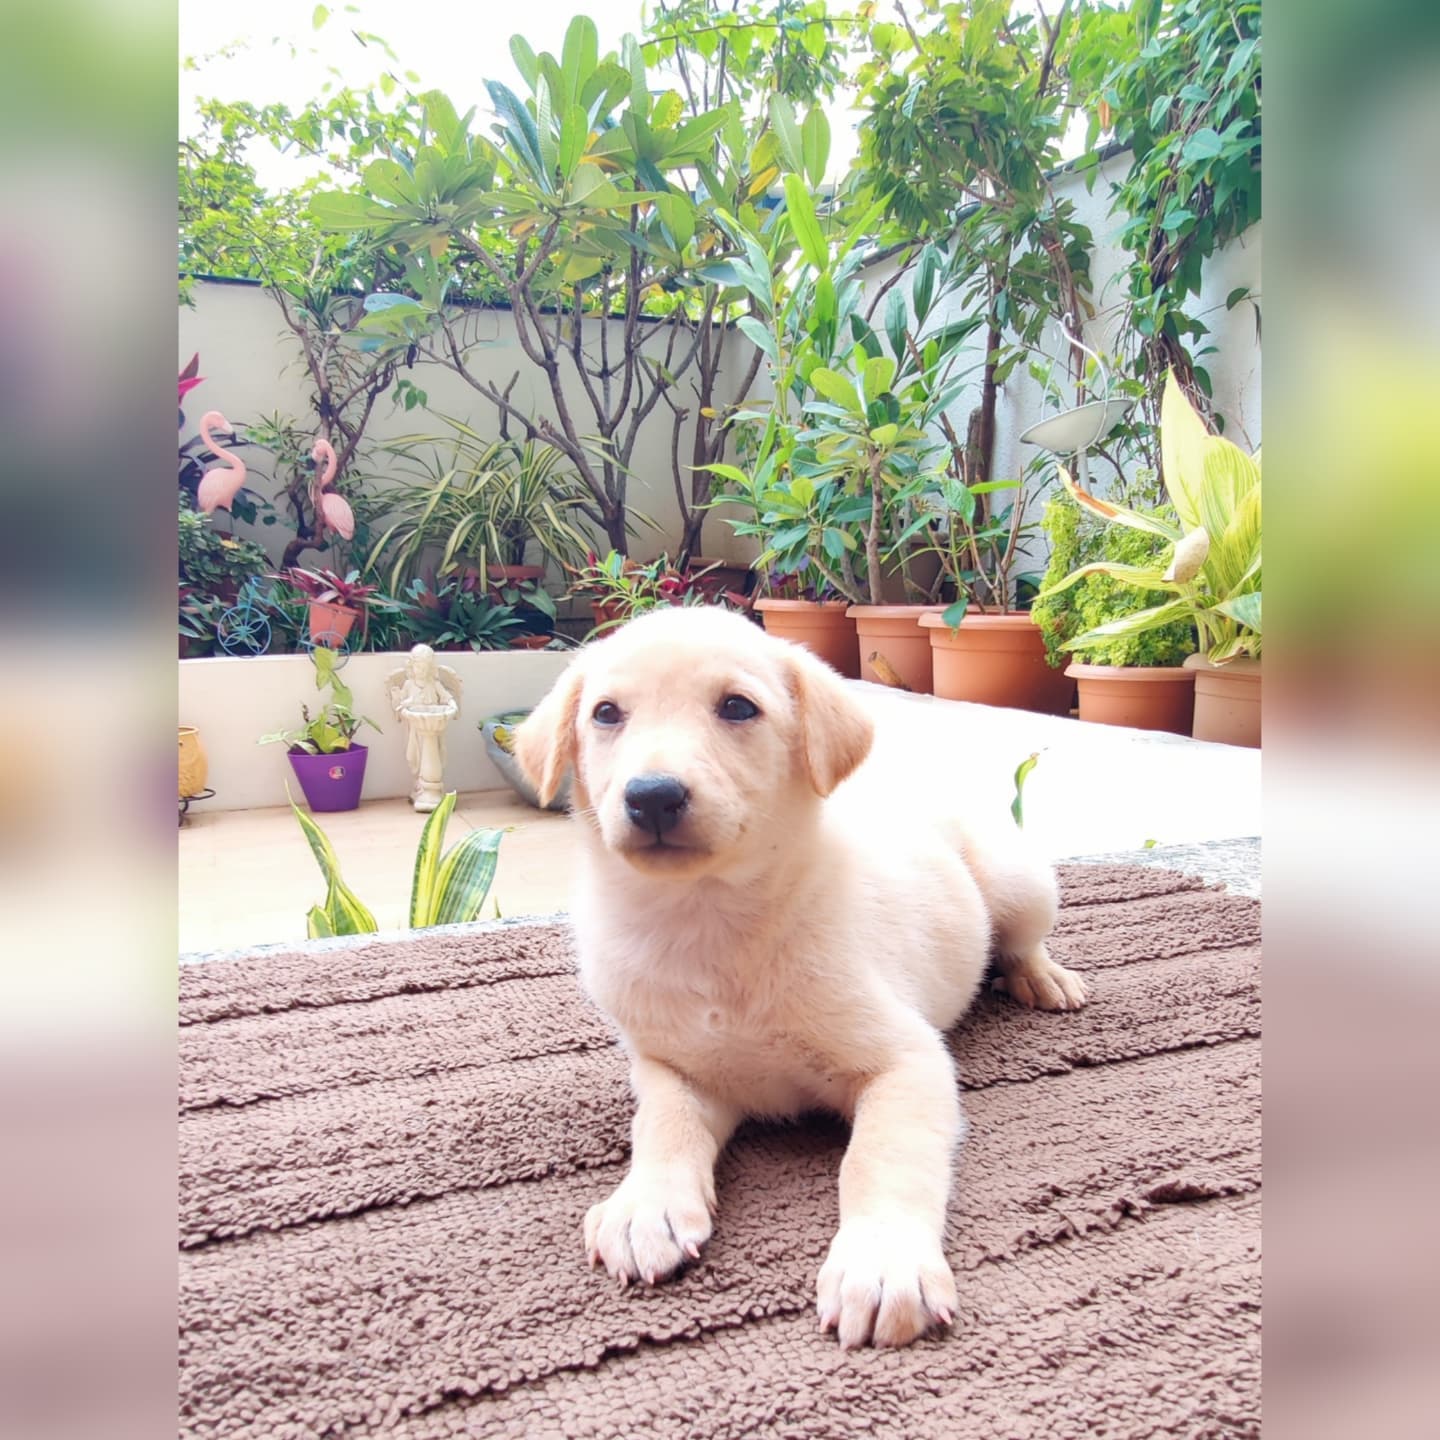 Butter (Indie Pup) Up for Adoption in Pune - Adopt Dog